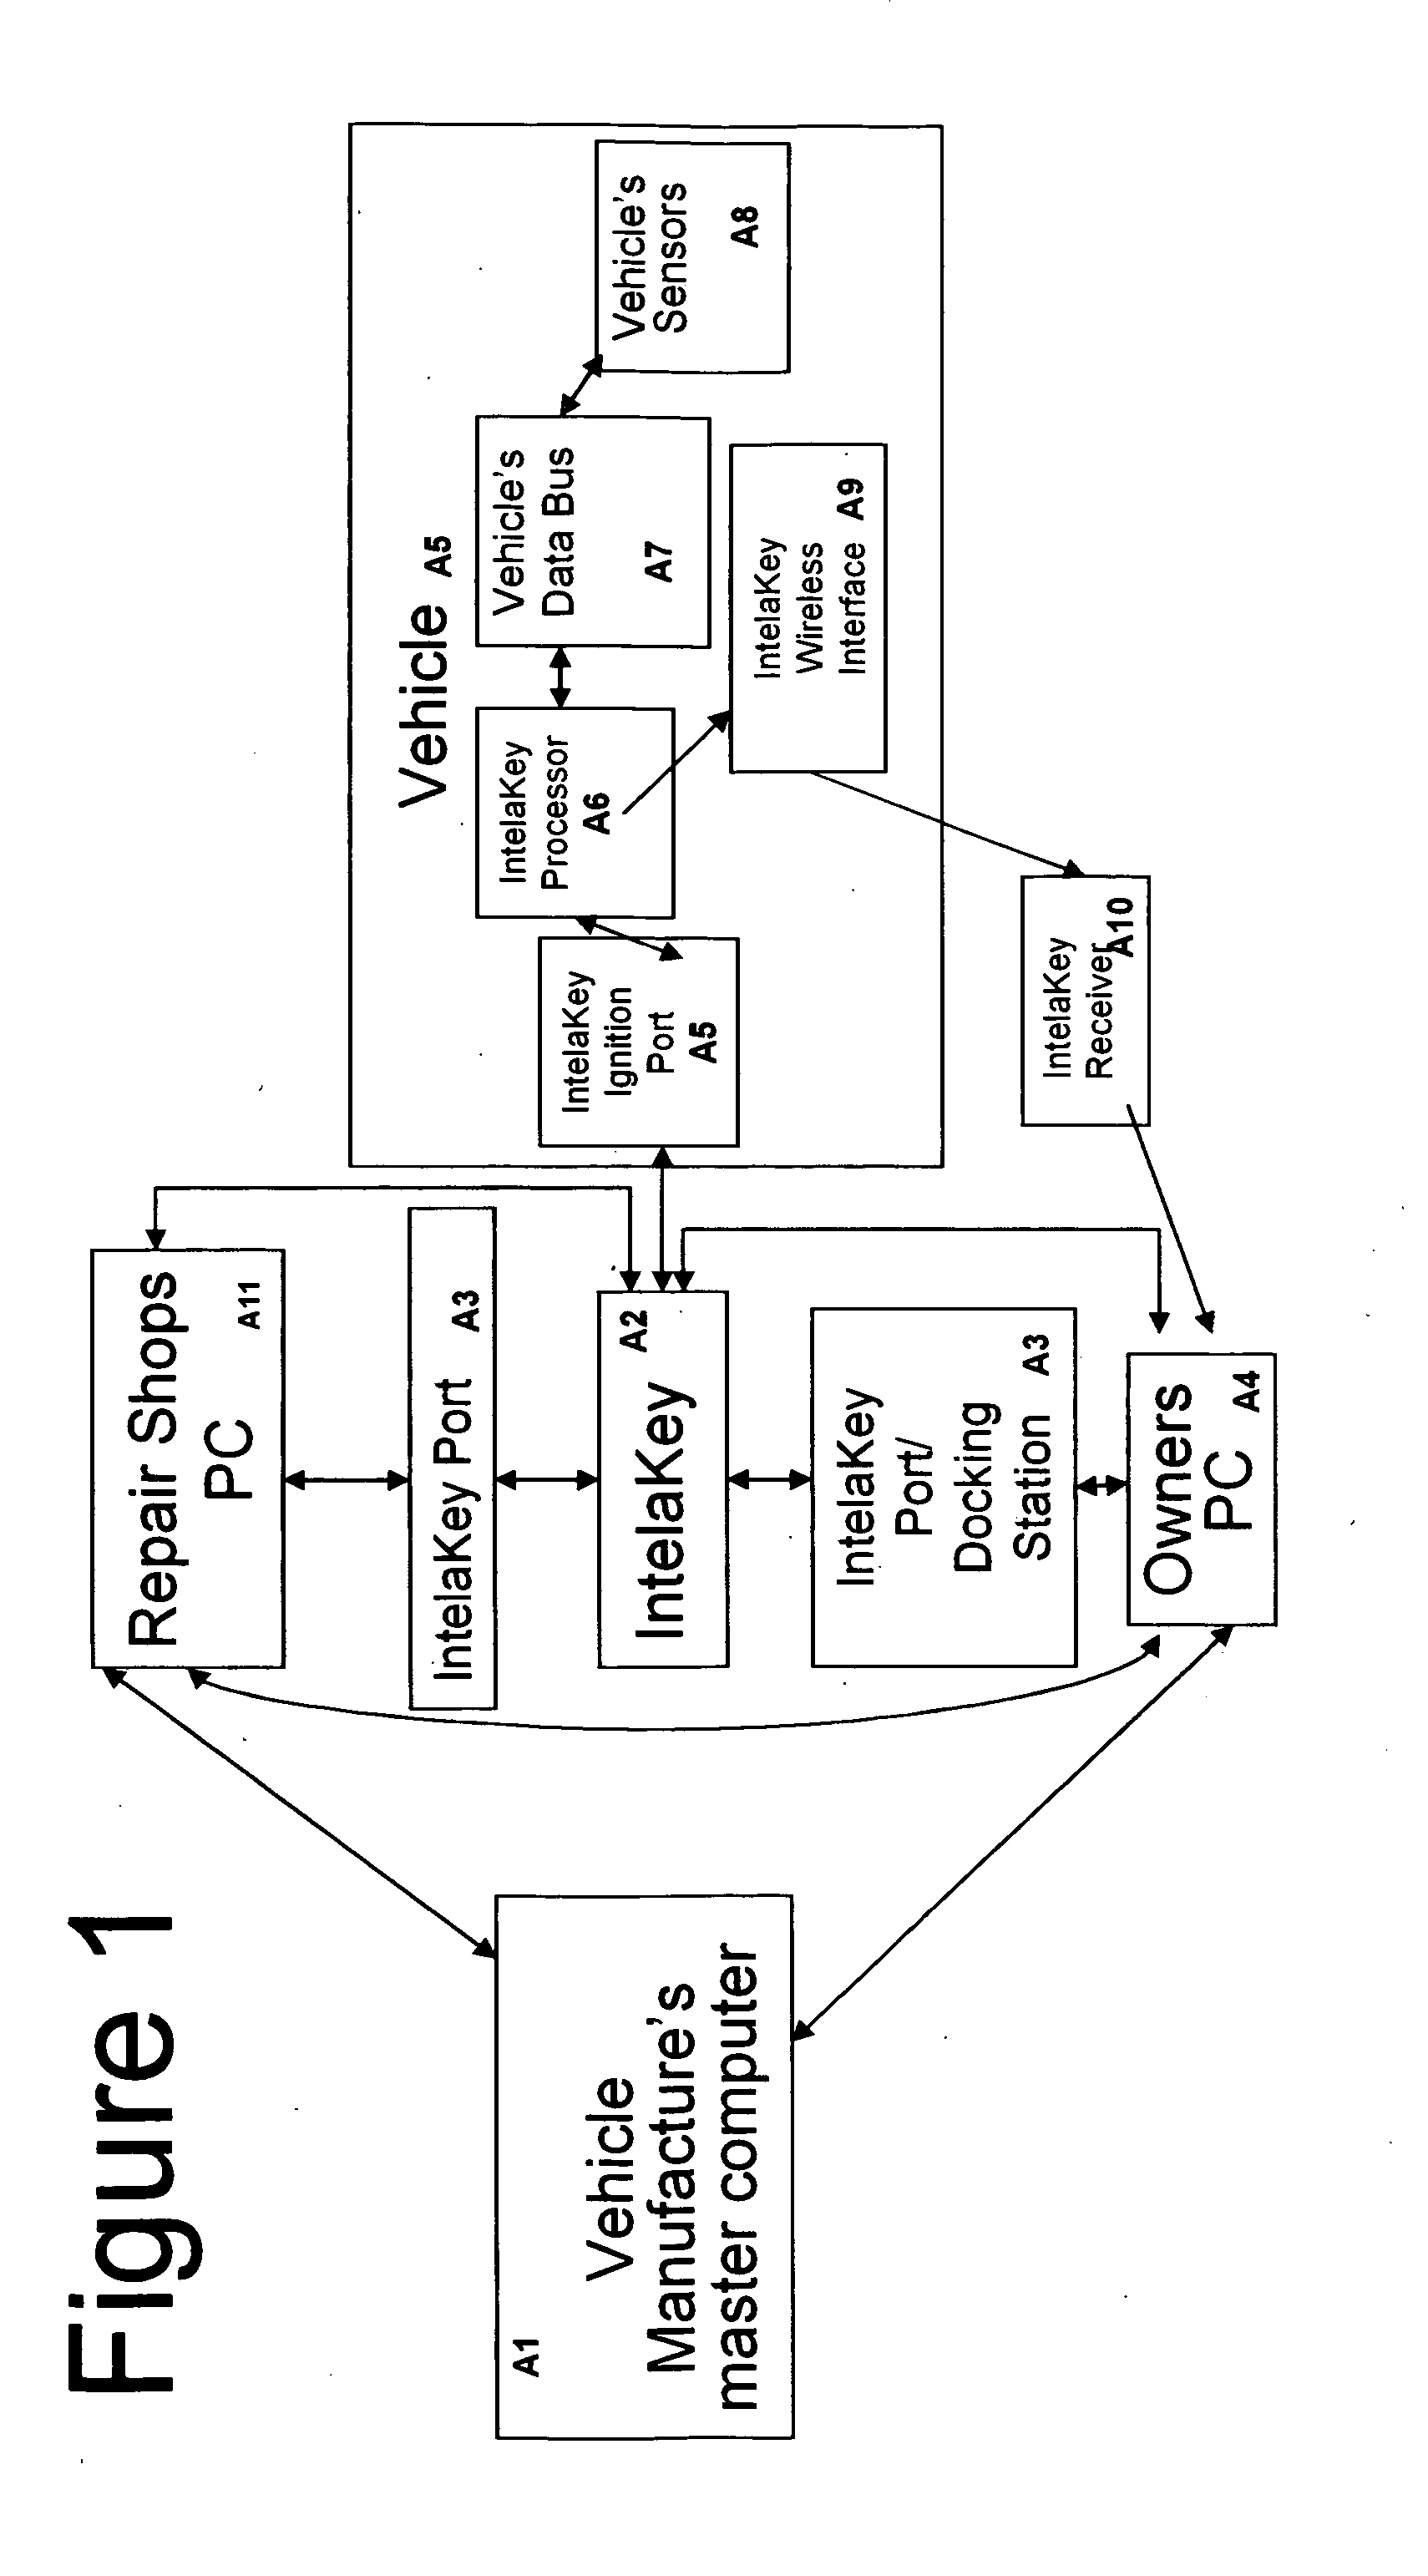 System and method for using a vehicle's key to collect vehicle data and diagnose mechanical problems, to store and compare security data to allow only authorized use of vehicles and a method to automatically set vehicle features usng the key